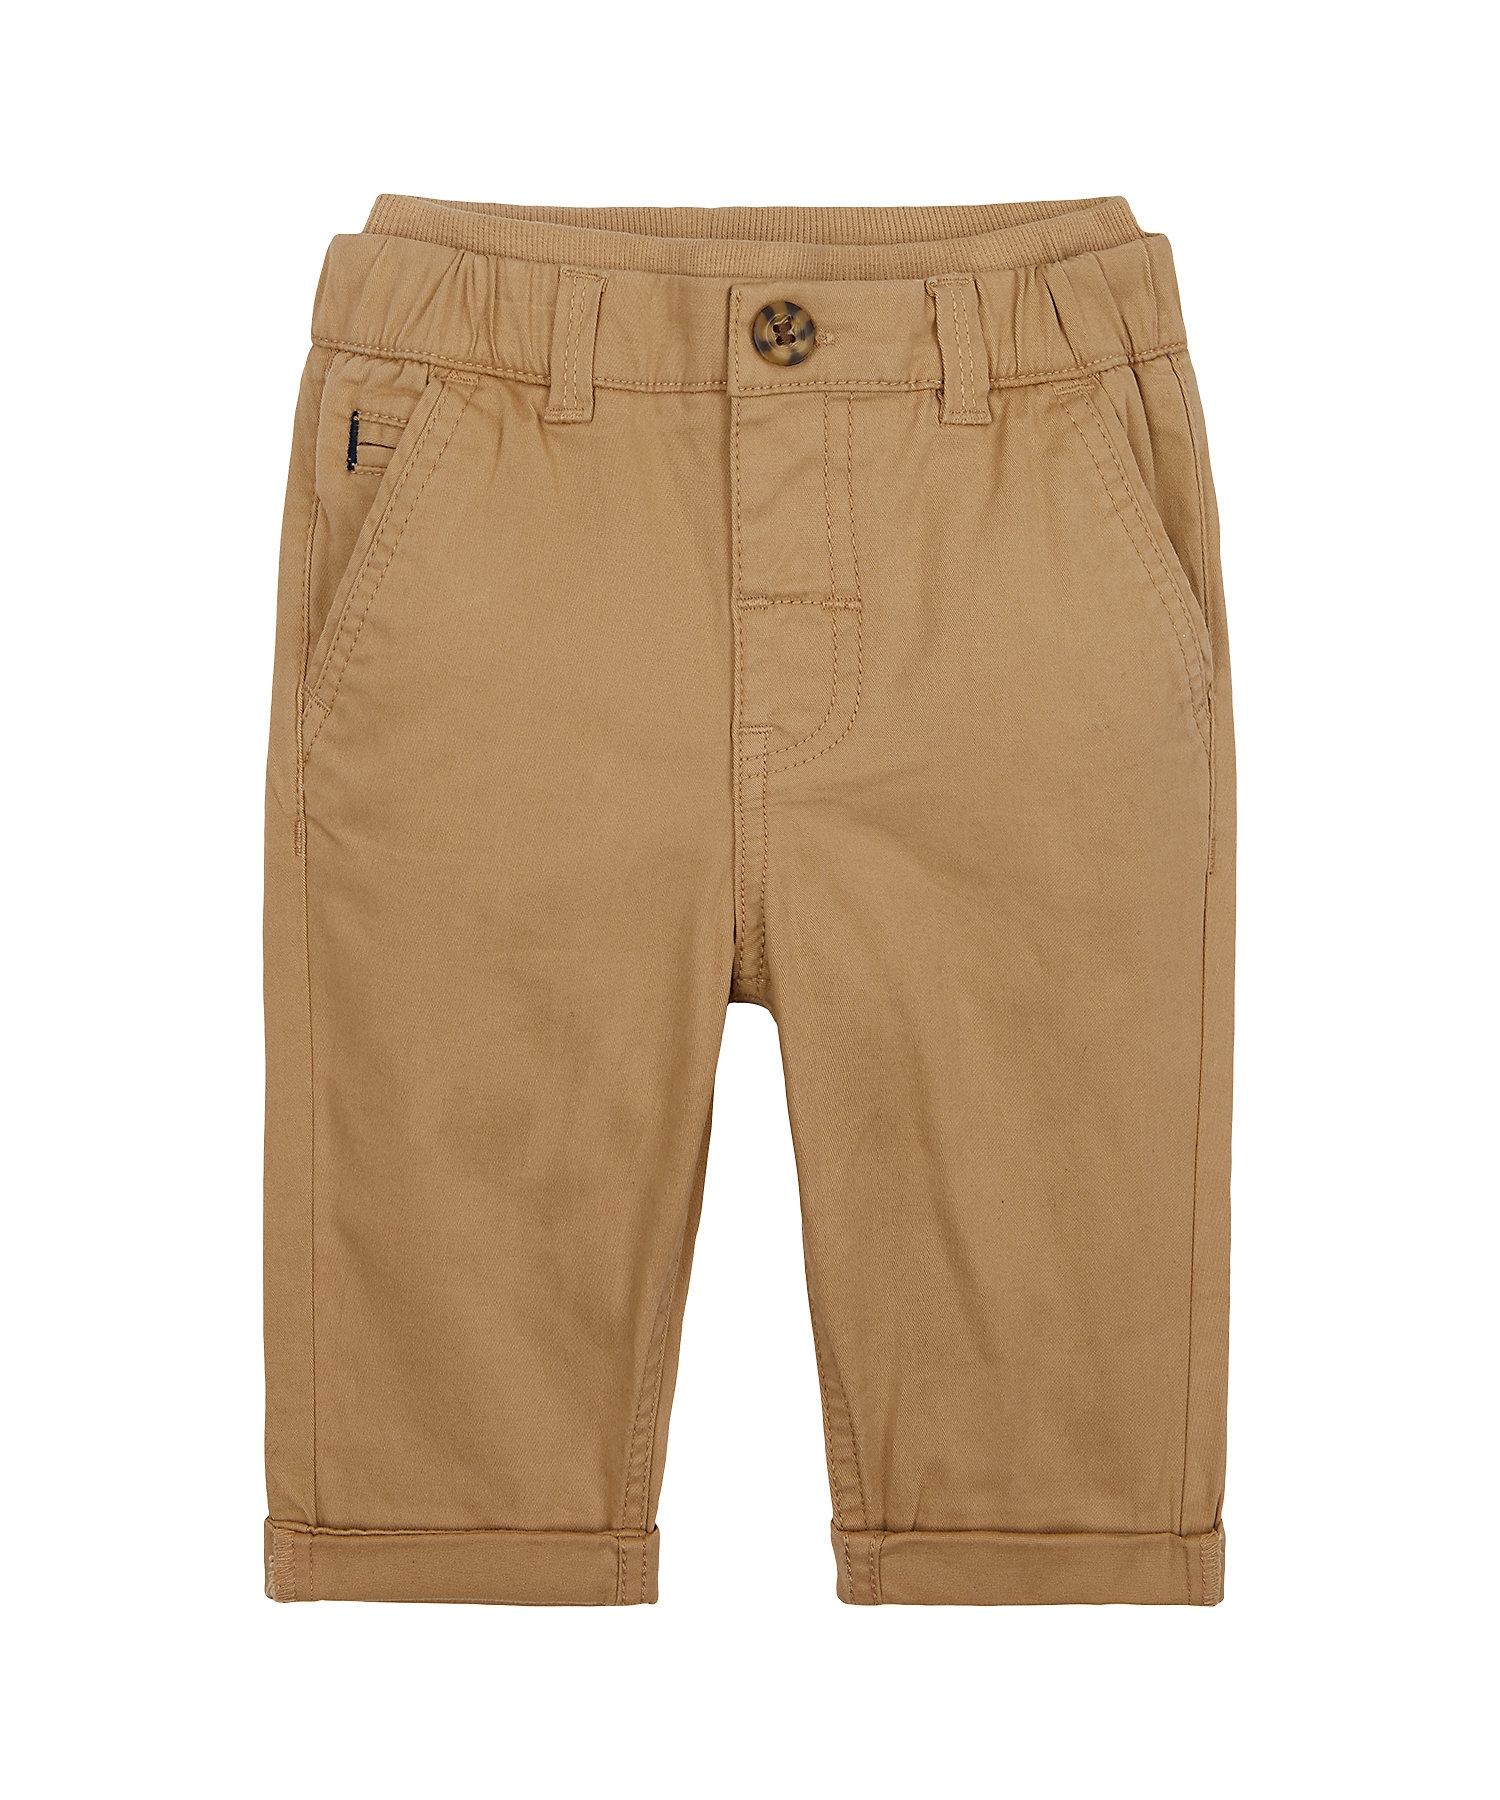 Boys Chino Trousers - Brown